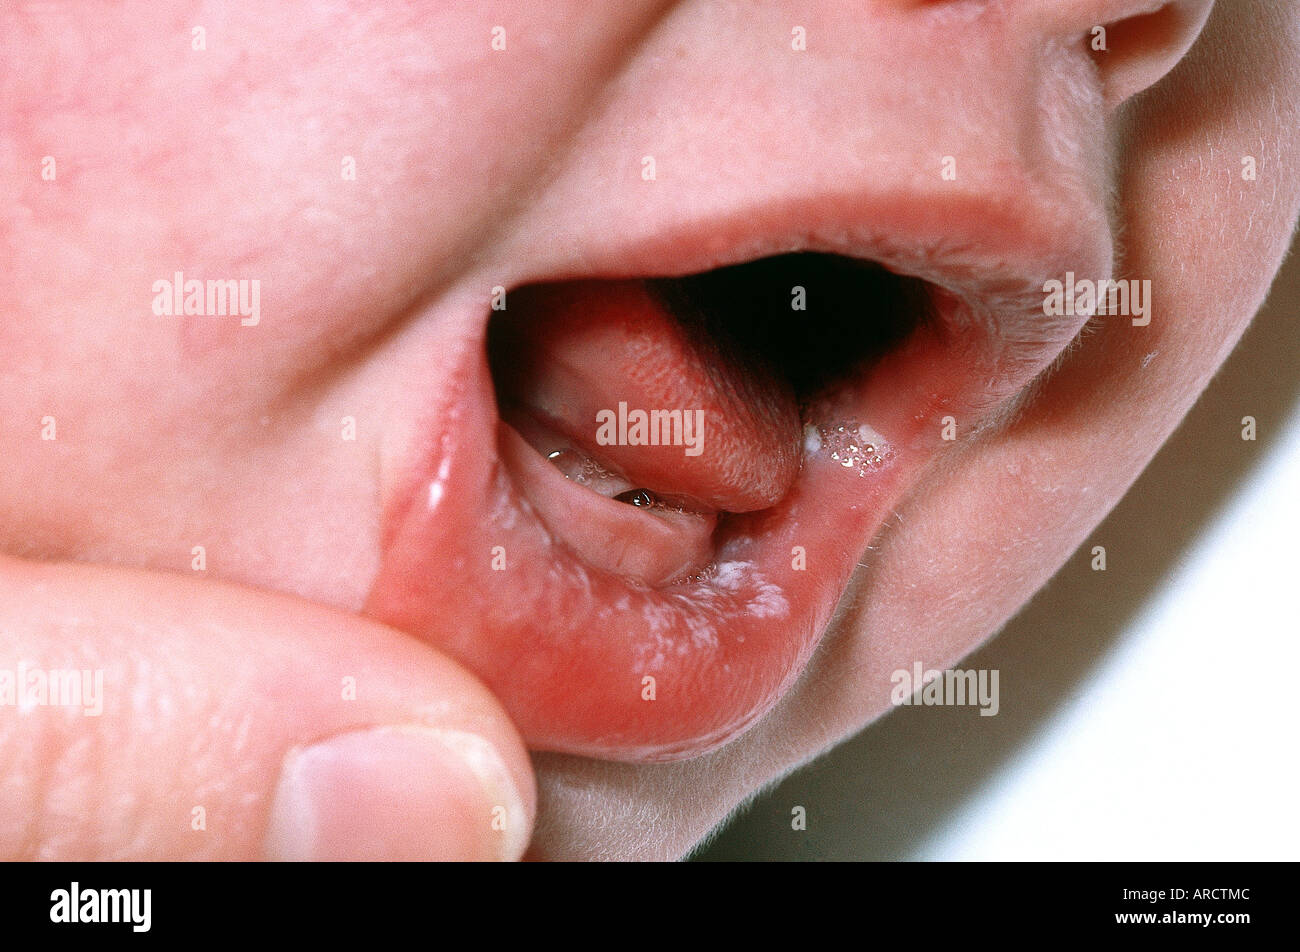 A photograph of a baby with oral thrush, an infection caused by the yeast germ Candida. Stock Photo